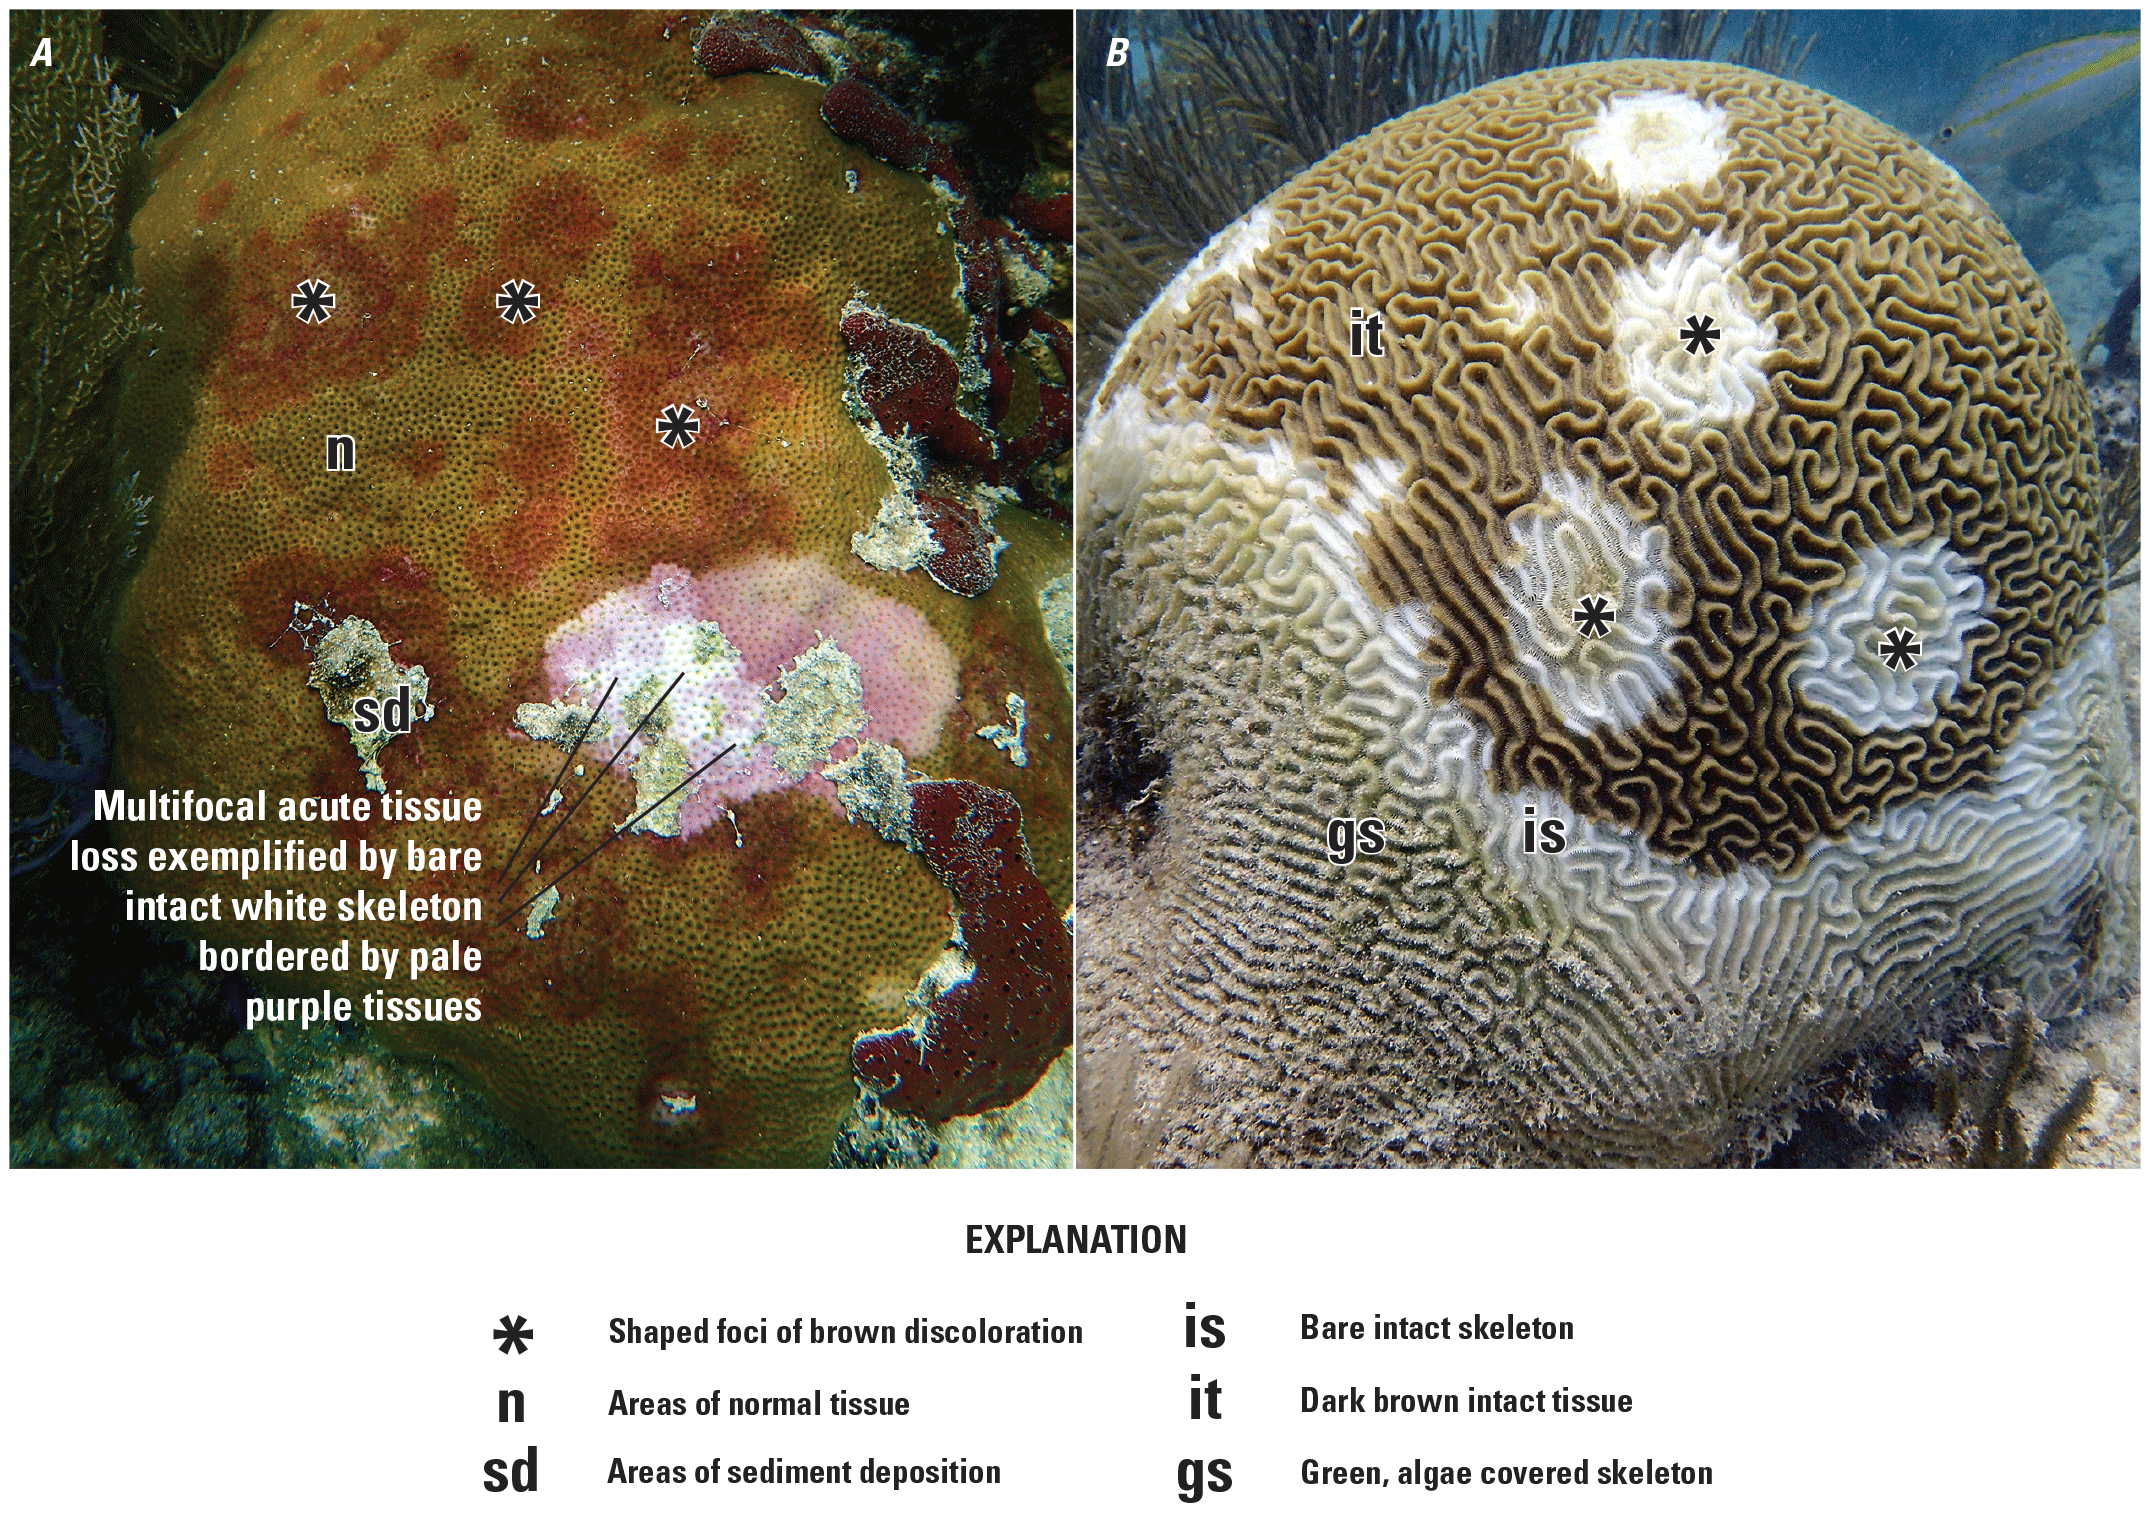 The tissue loss areas of the coral are visually apparent.